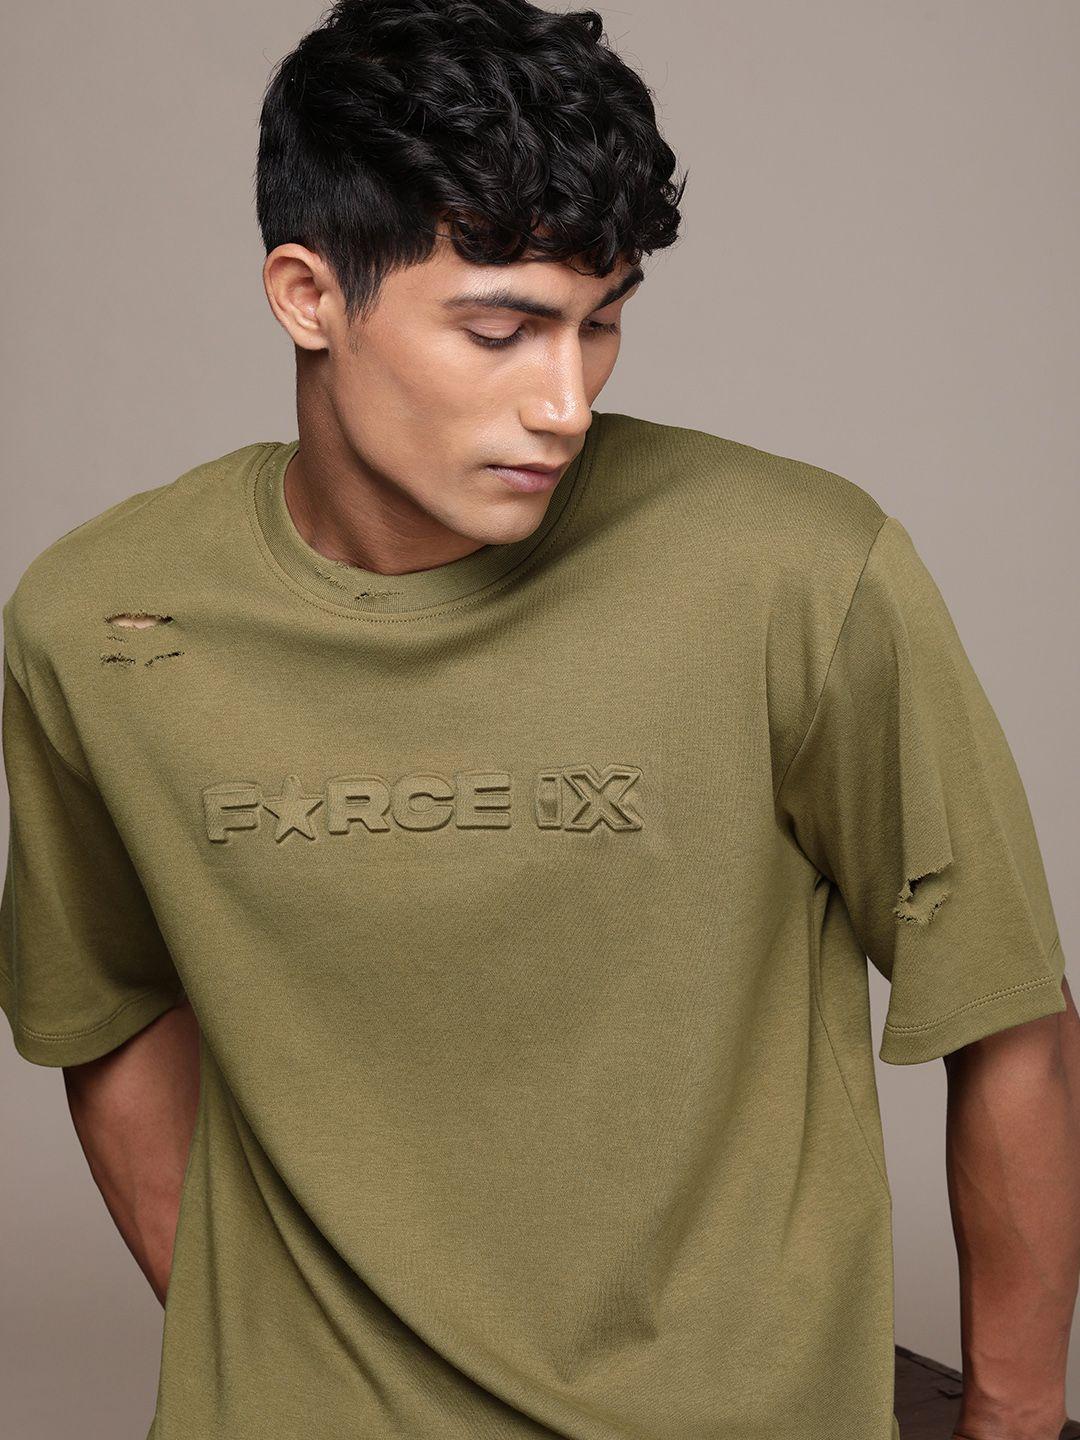 force ix men ripped loose fit pure cotton t-shirt with brand logo embossed detail